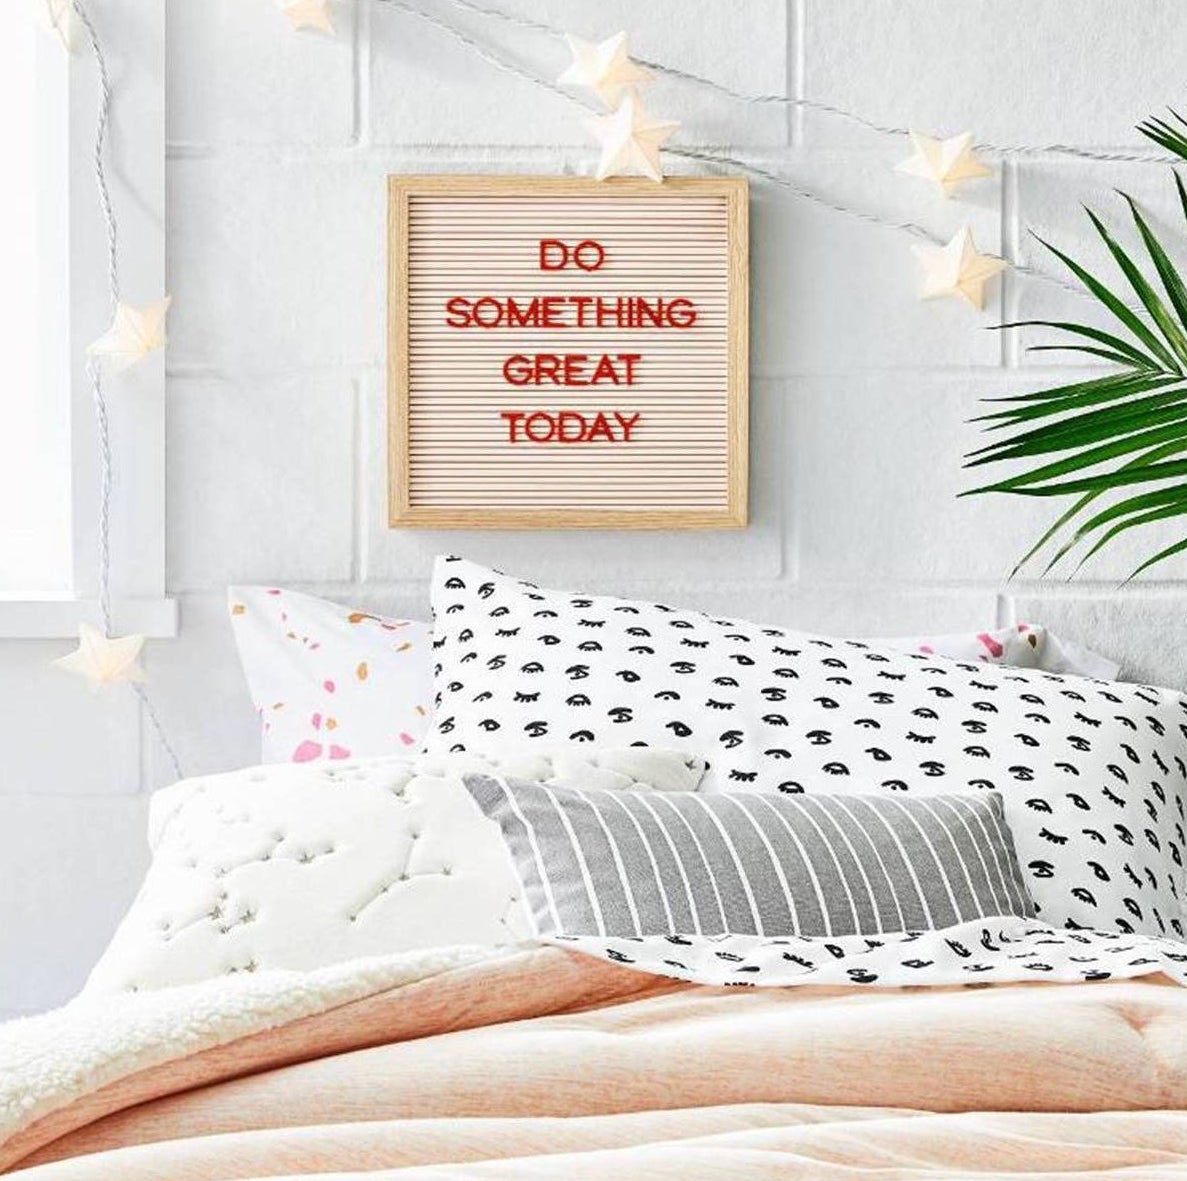 27 Products for College Students to Make a Dorm Feel Like an Apartment